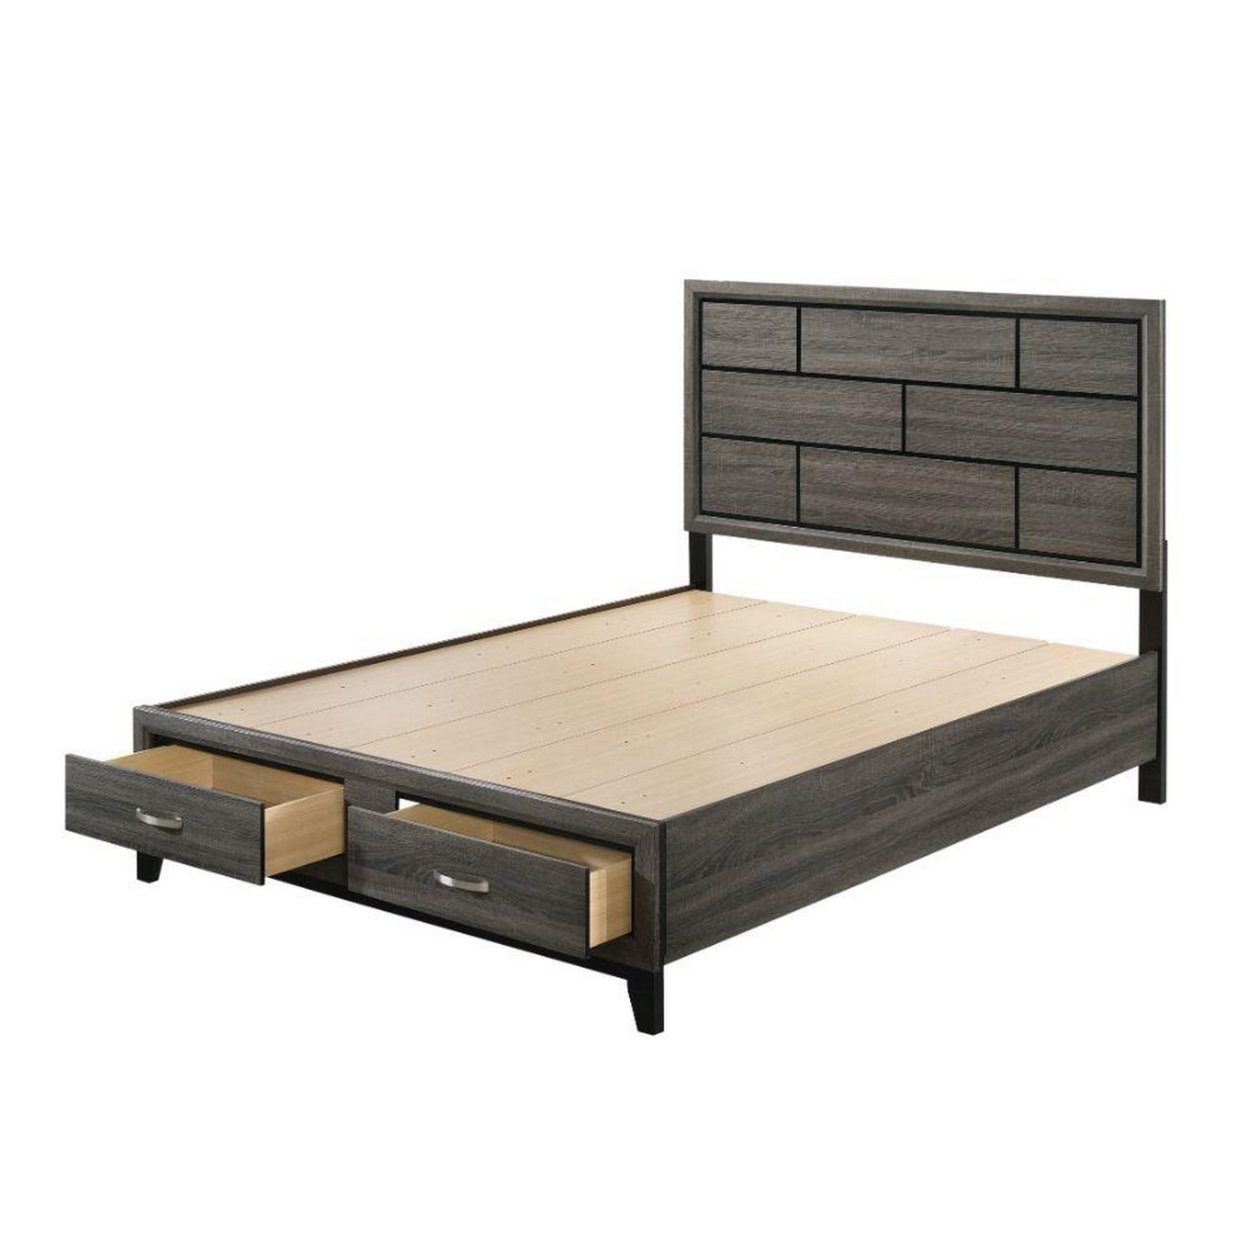 Grooved Pattern Wooden Queen Size Bed With 2 Drawers, Gray- Saltoro Sherpi